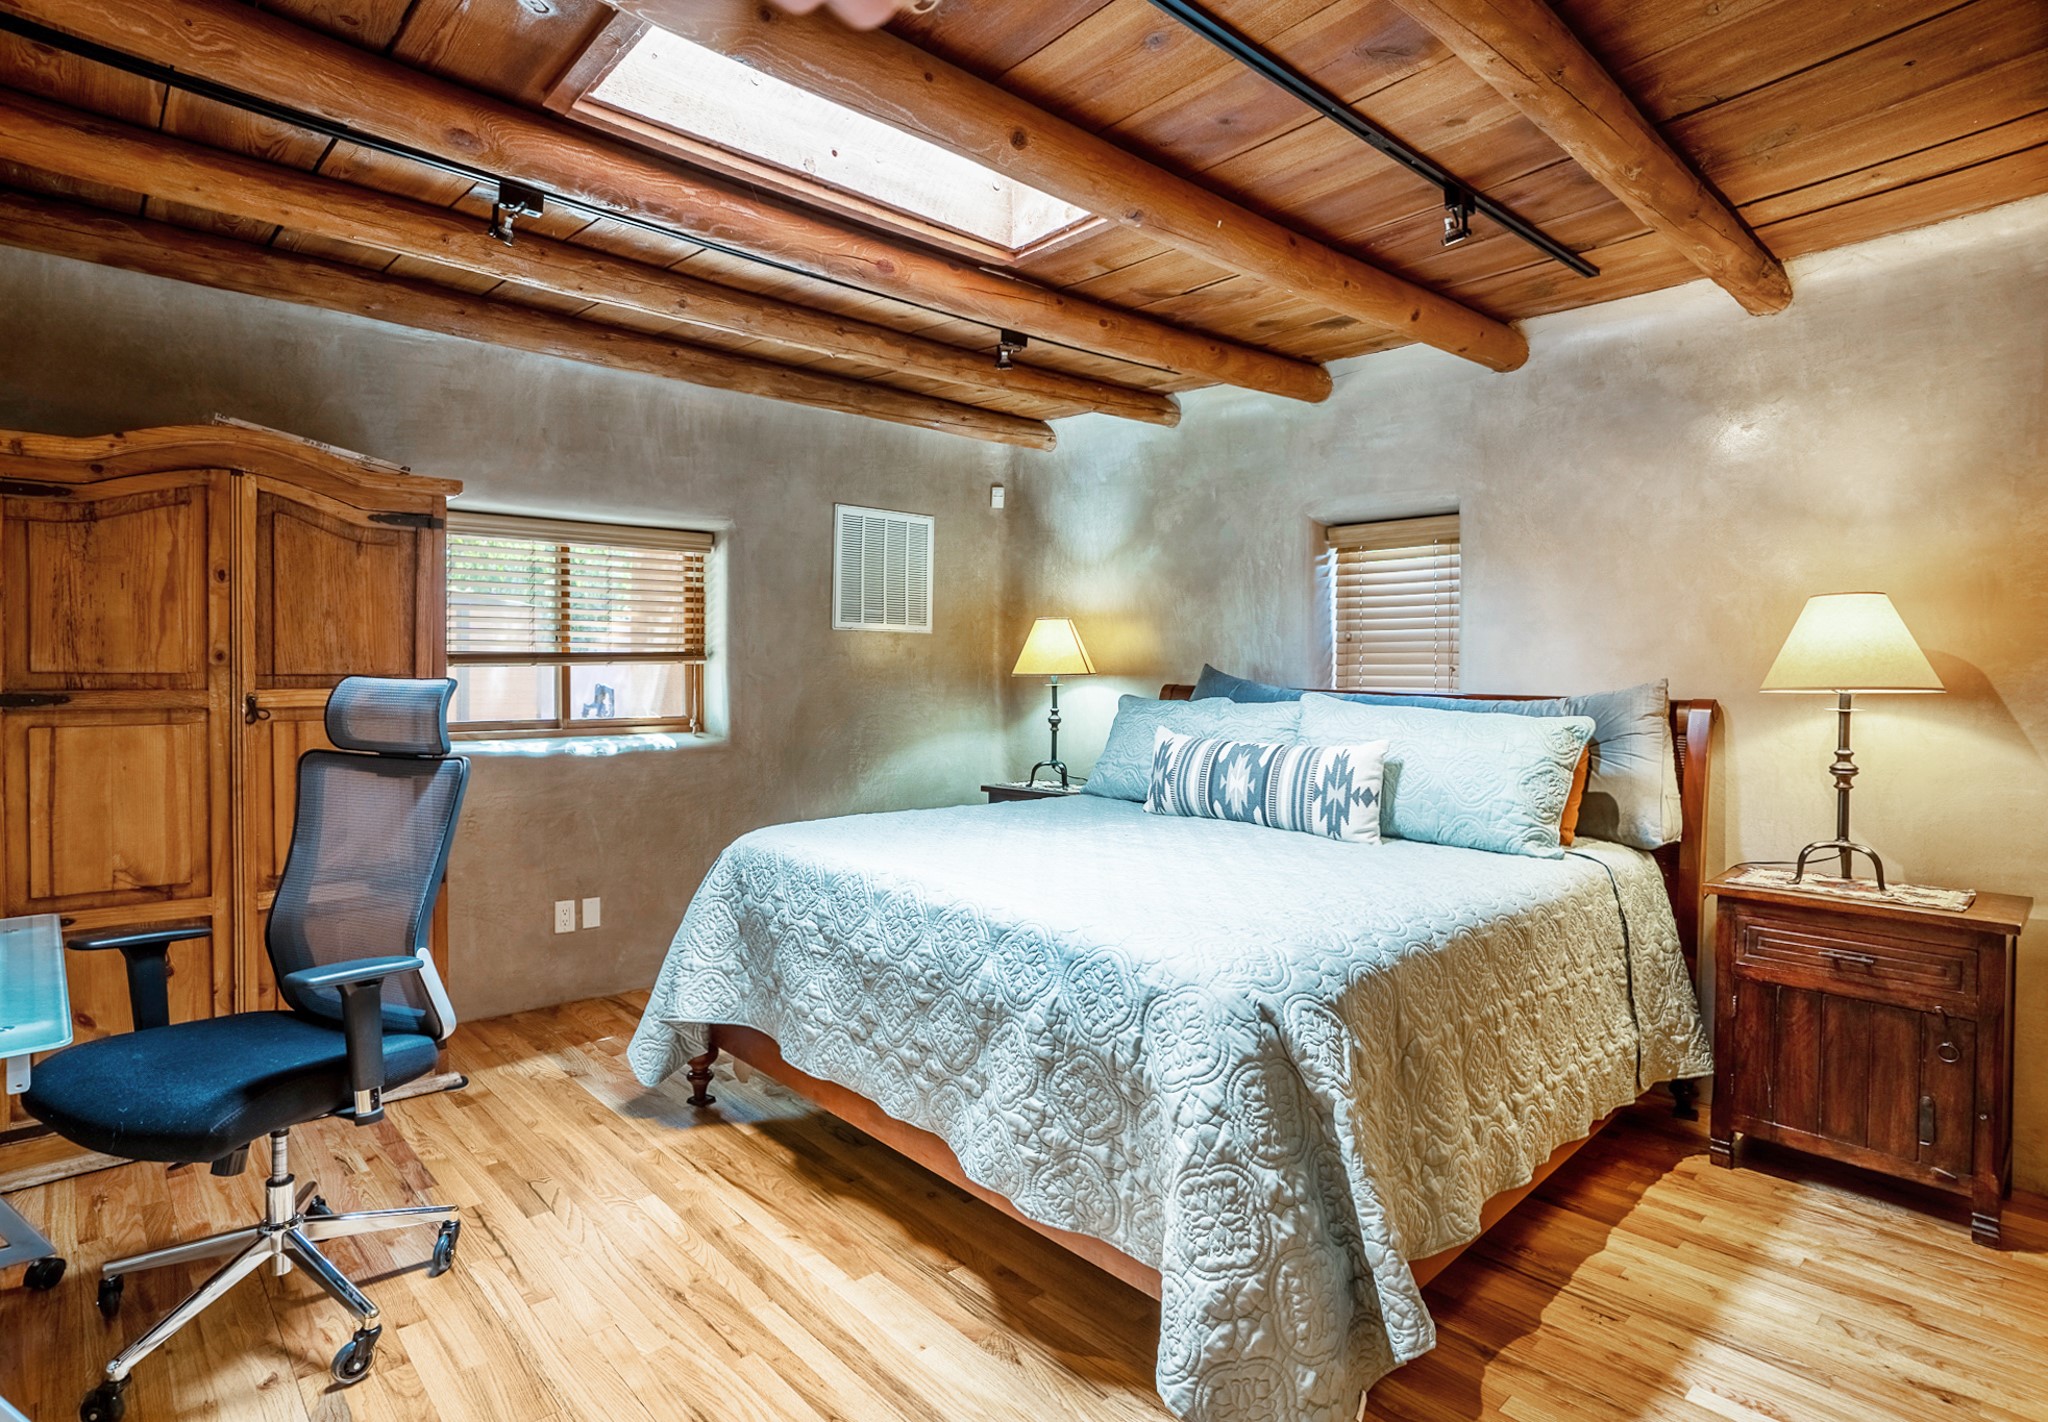 111 Saint Francis S, Santa Fe, New Mexico 87501, 1 Bedroom Bedrooms, ,1 BathroomBathrooms,Residential,For Sale,111 Saint Francis S,202338233